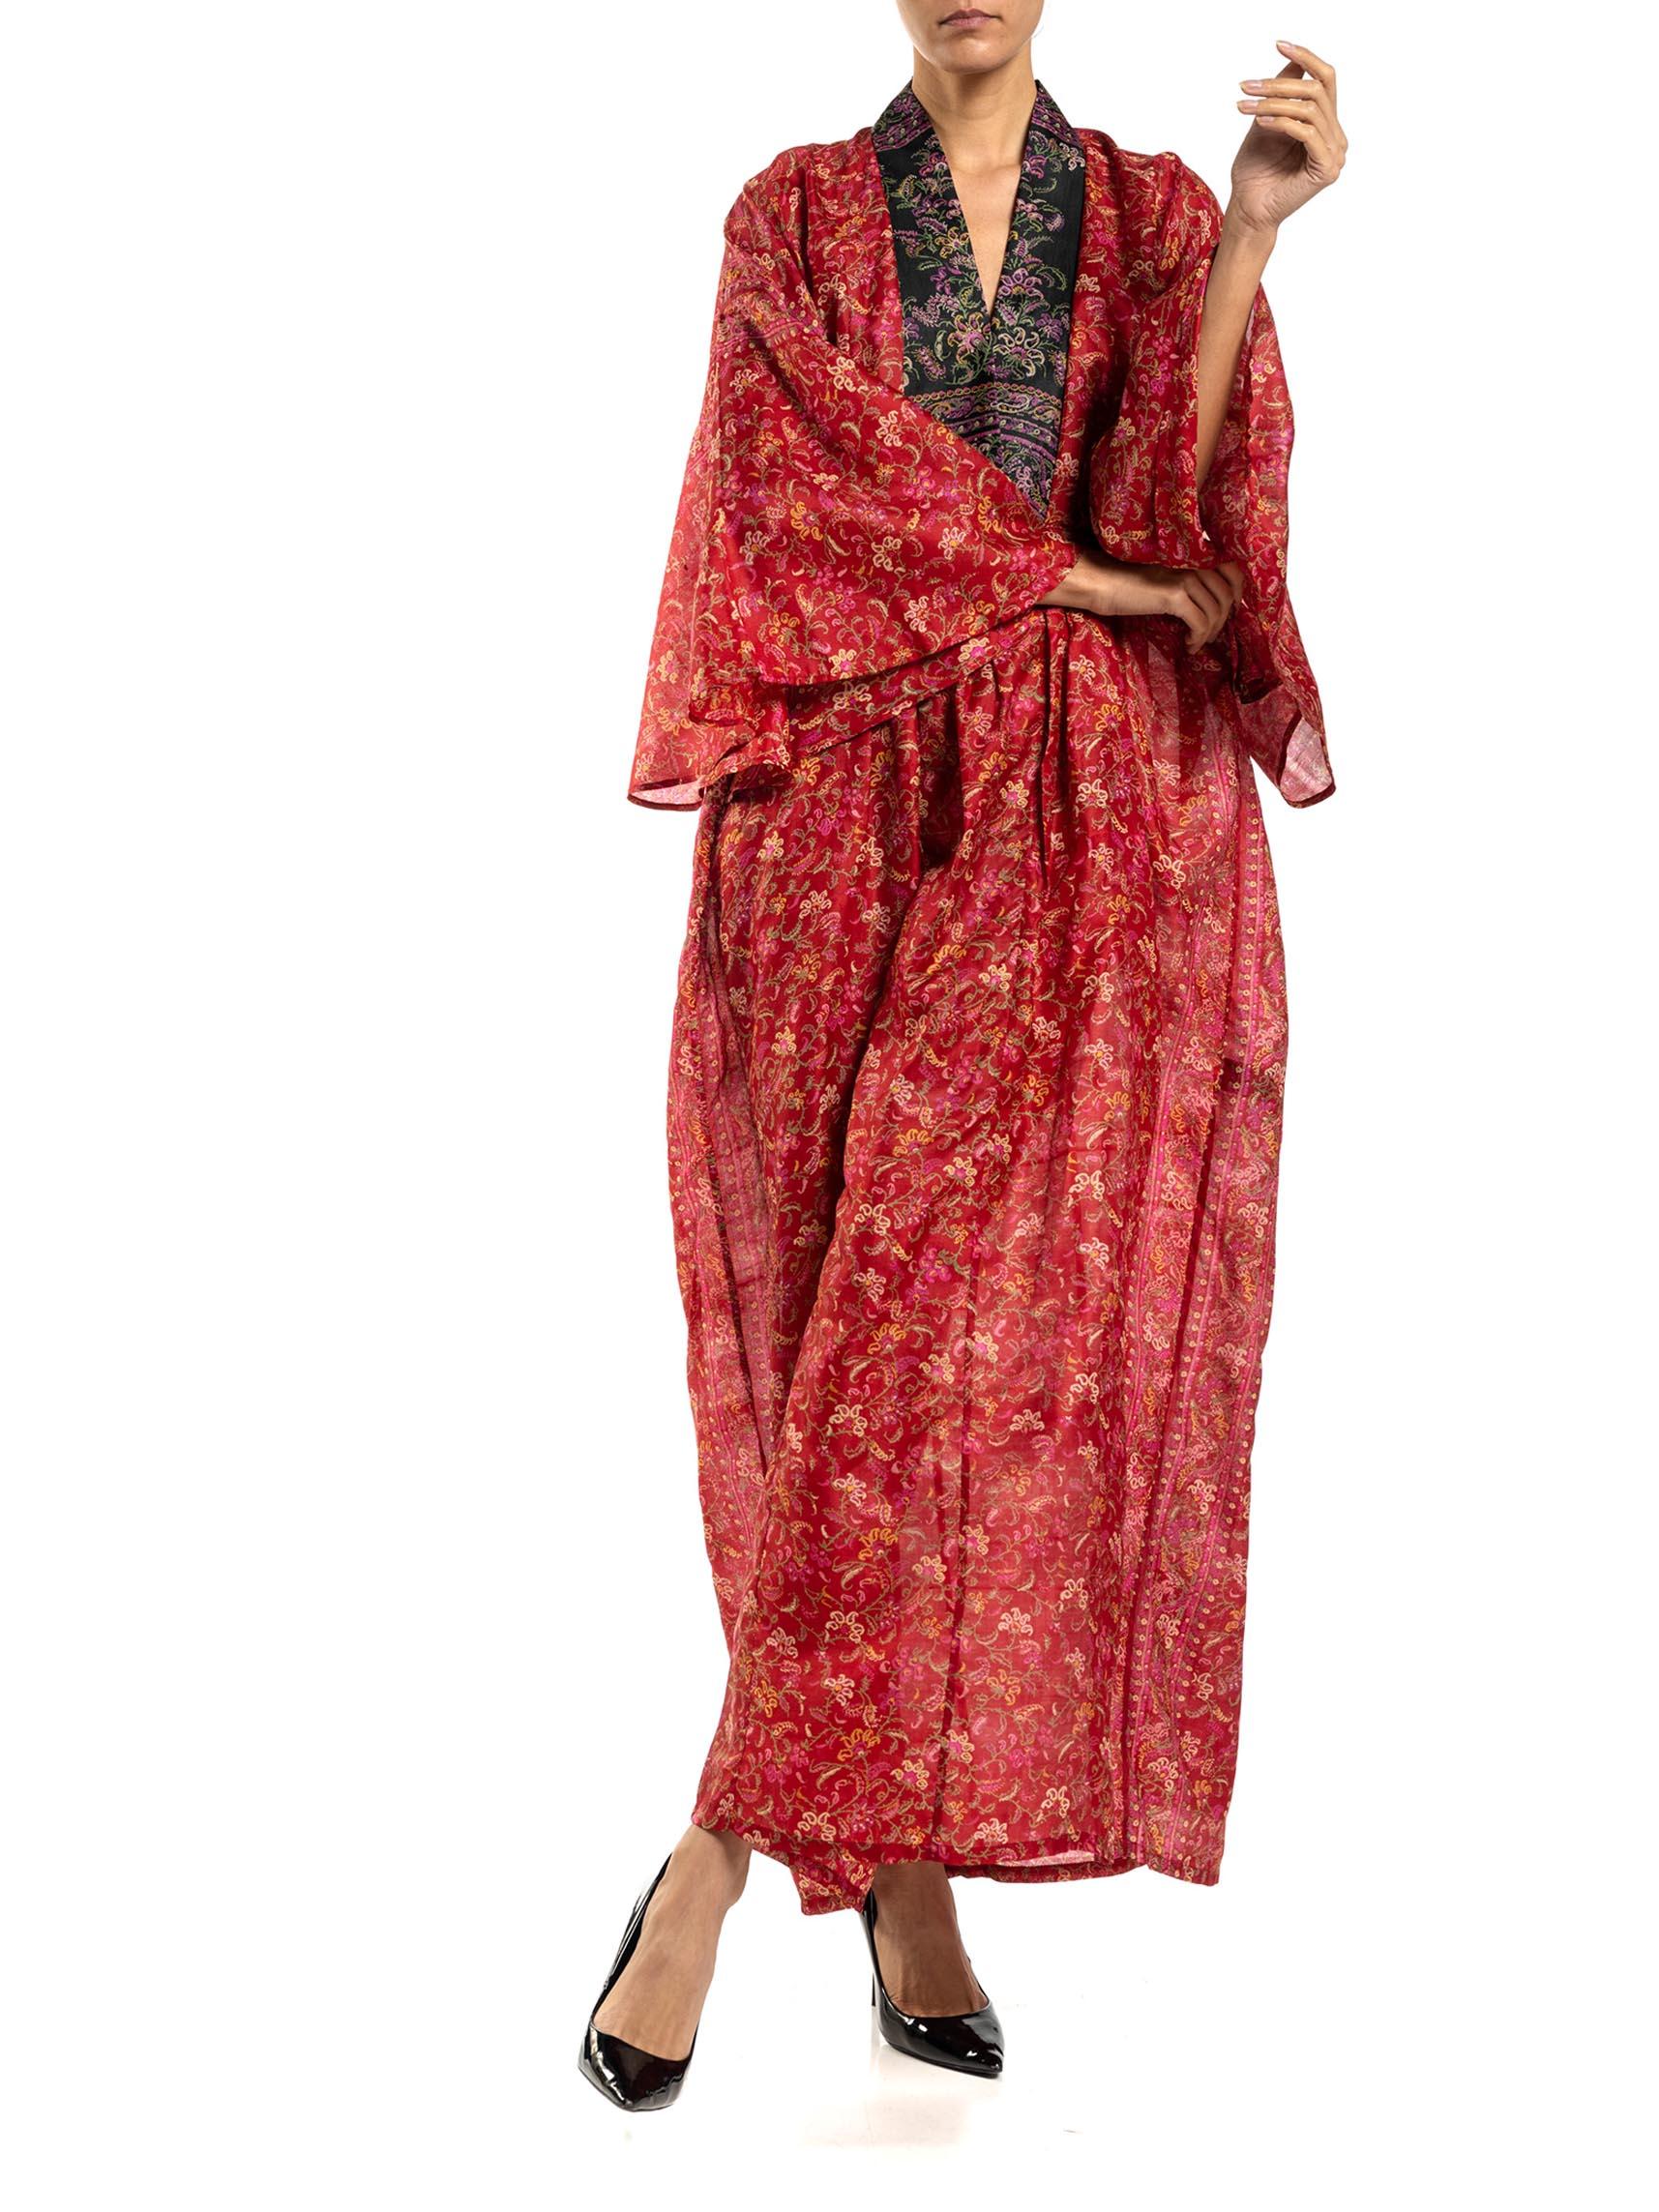 MORPHEW COLLECTION Red & Black Paisley Silk Floral Kaftan Made From Vintage Sari For Sale 2